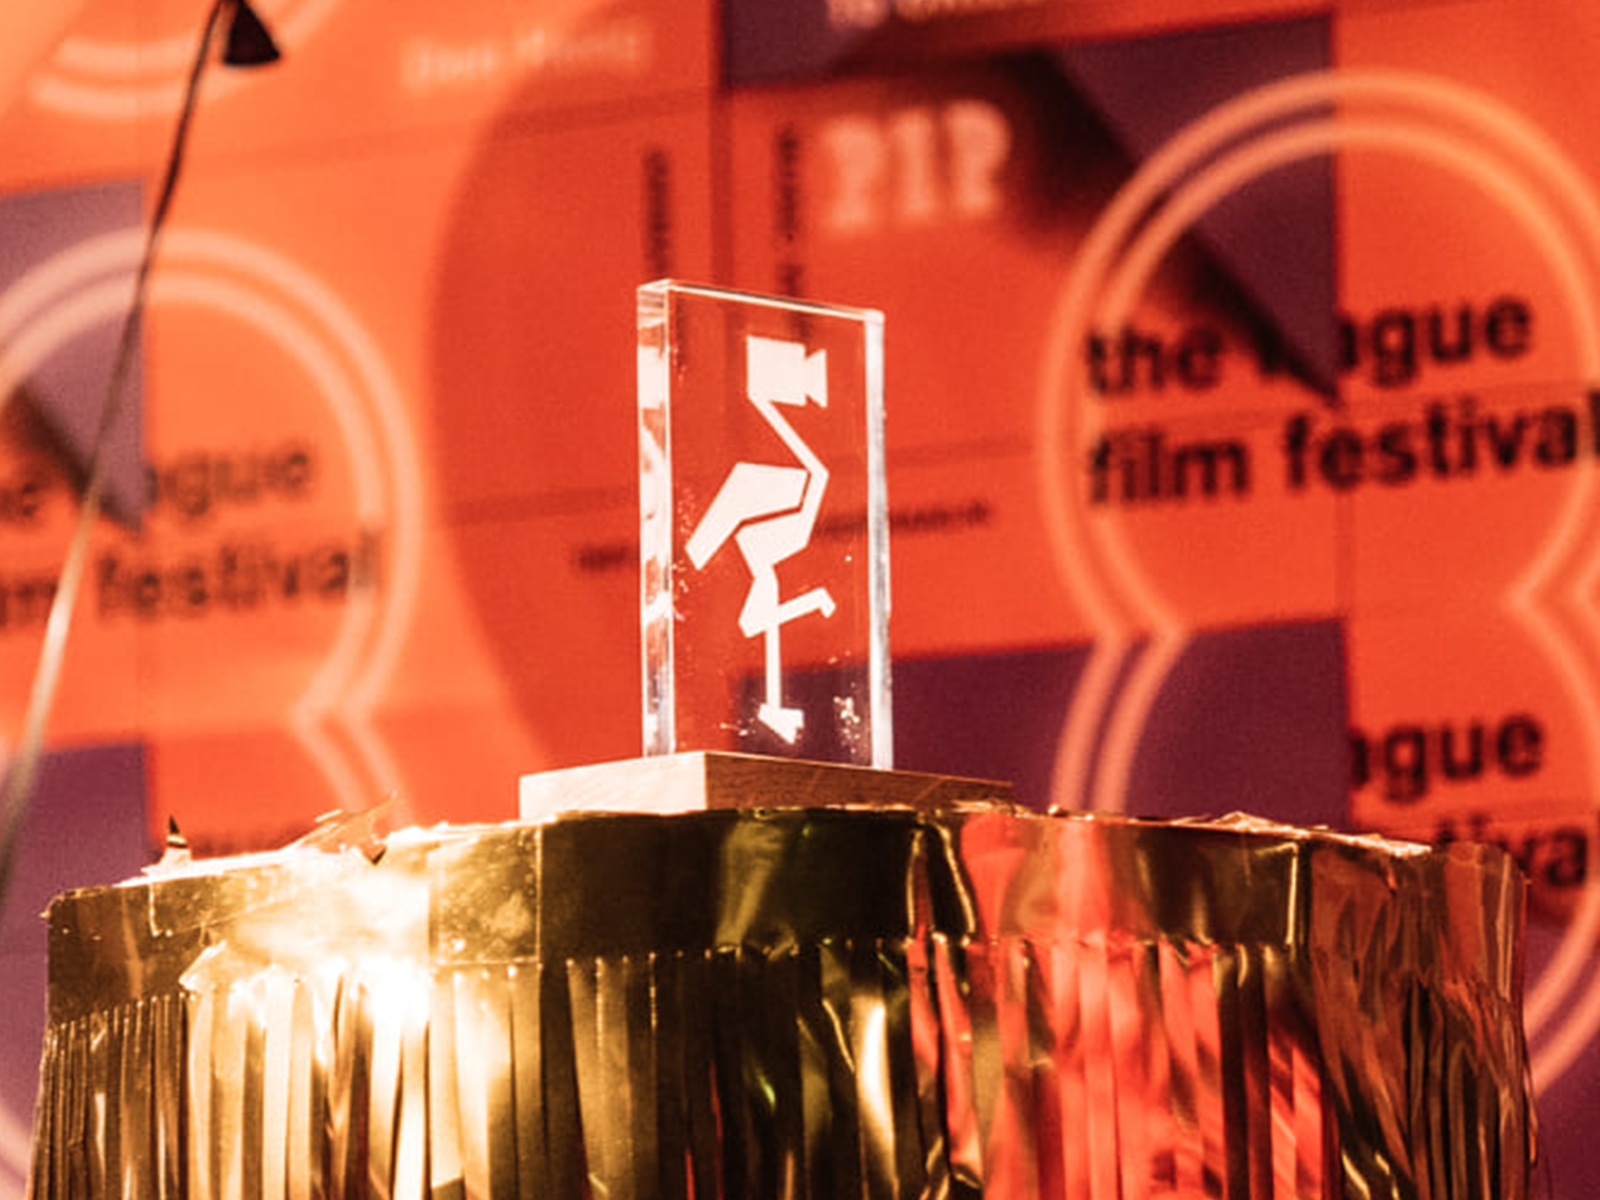 The Hague Film Festival – design by Work and Dam